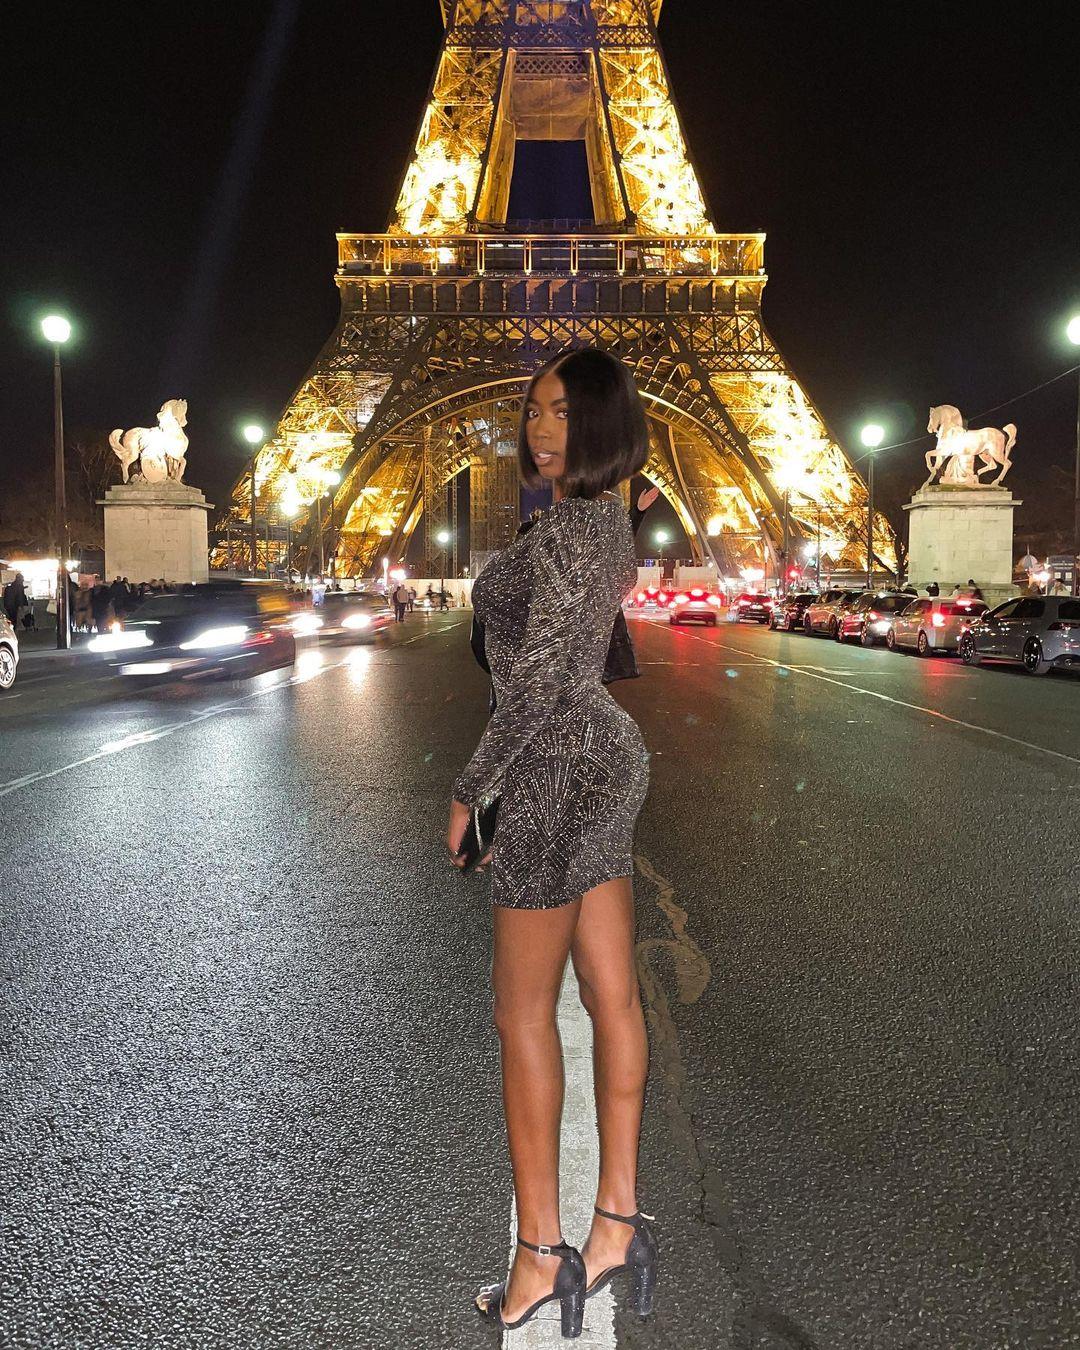 class="content__text"
 Not me landing in Los Angeles and still posting content from Paris 🙈 but it’s my favourite pic, show some love 🥺
.
.
.
.
 #eiffeltower #eiffeltoweratnight #paris #glitterdress #melanin #blackgirl #blackgirlmagic 
 